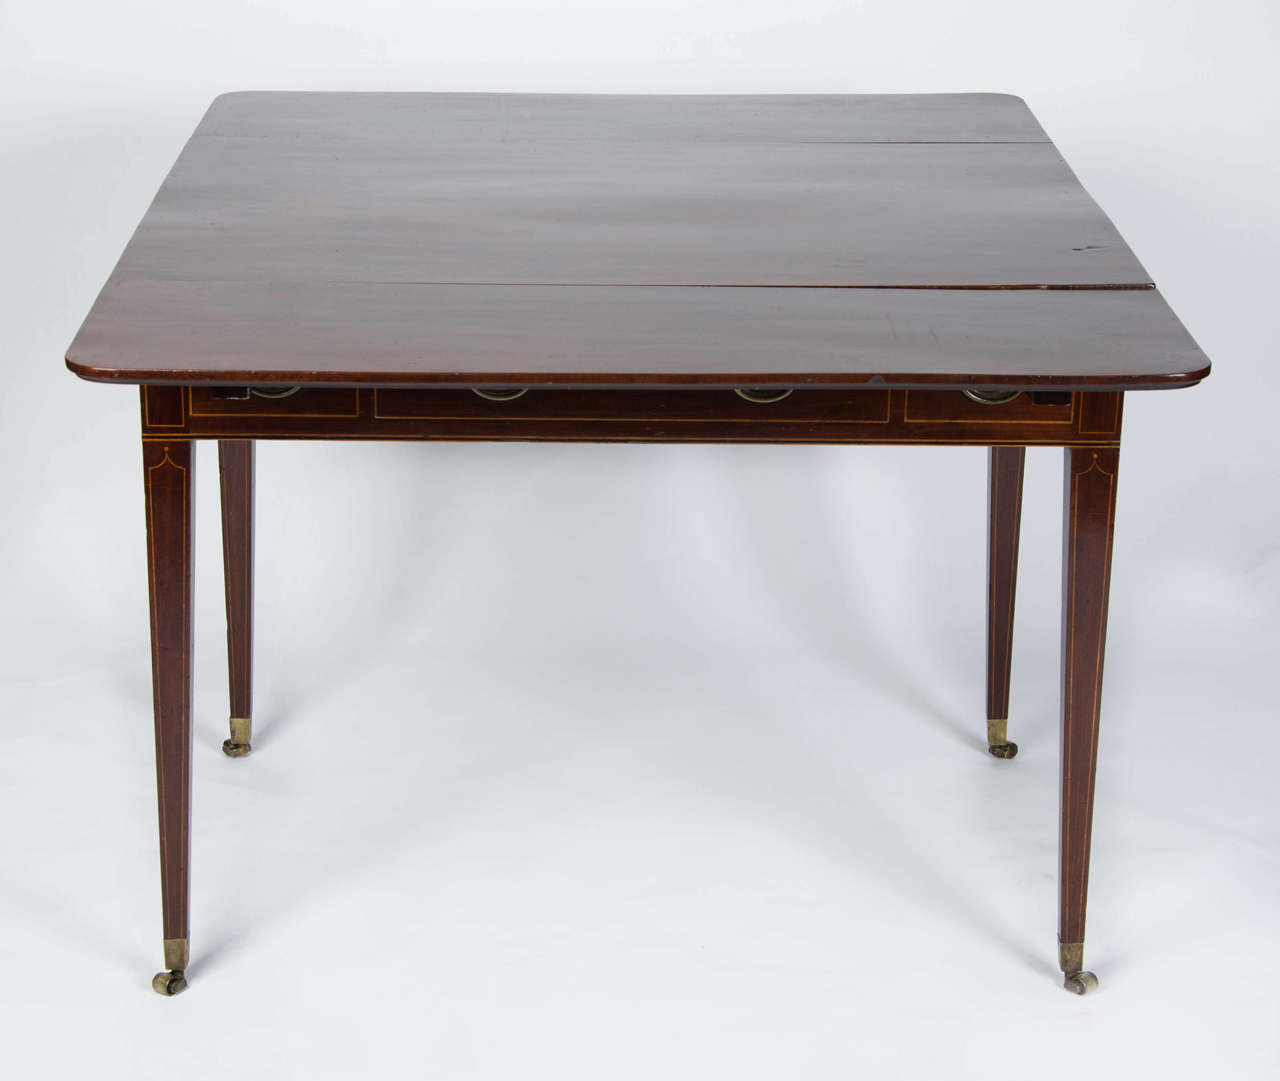 A fine and most useful late 18th century draw-leaf table similar to designs by Thomas Sheraton in his 'The cabinet-makers and upholsterer's drawing book'. 
The top concealing two-draw leaves with a single central fitted drawer.